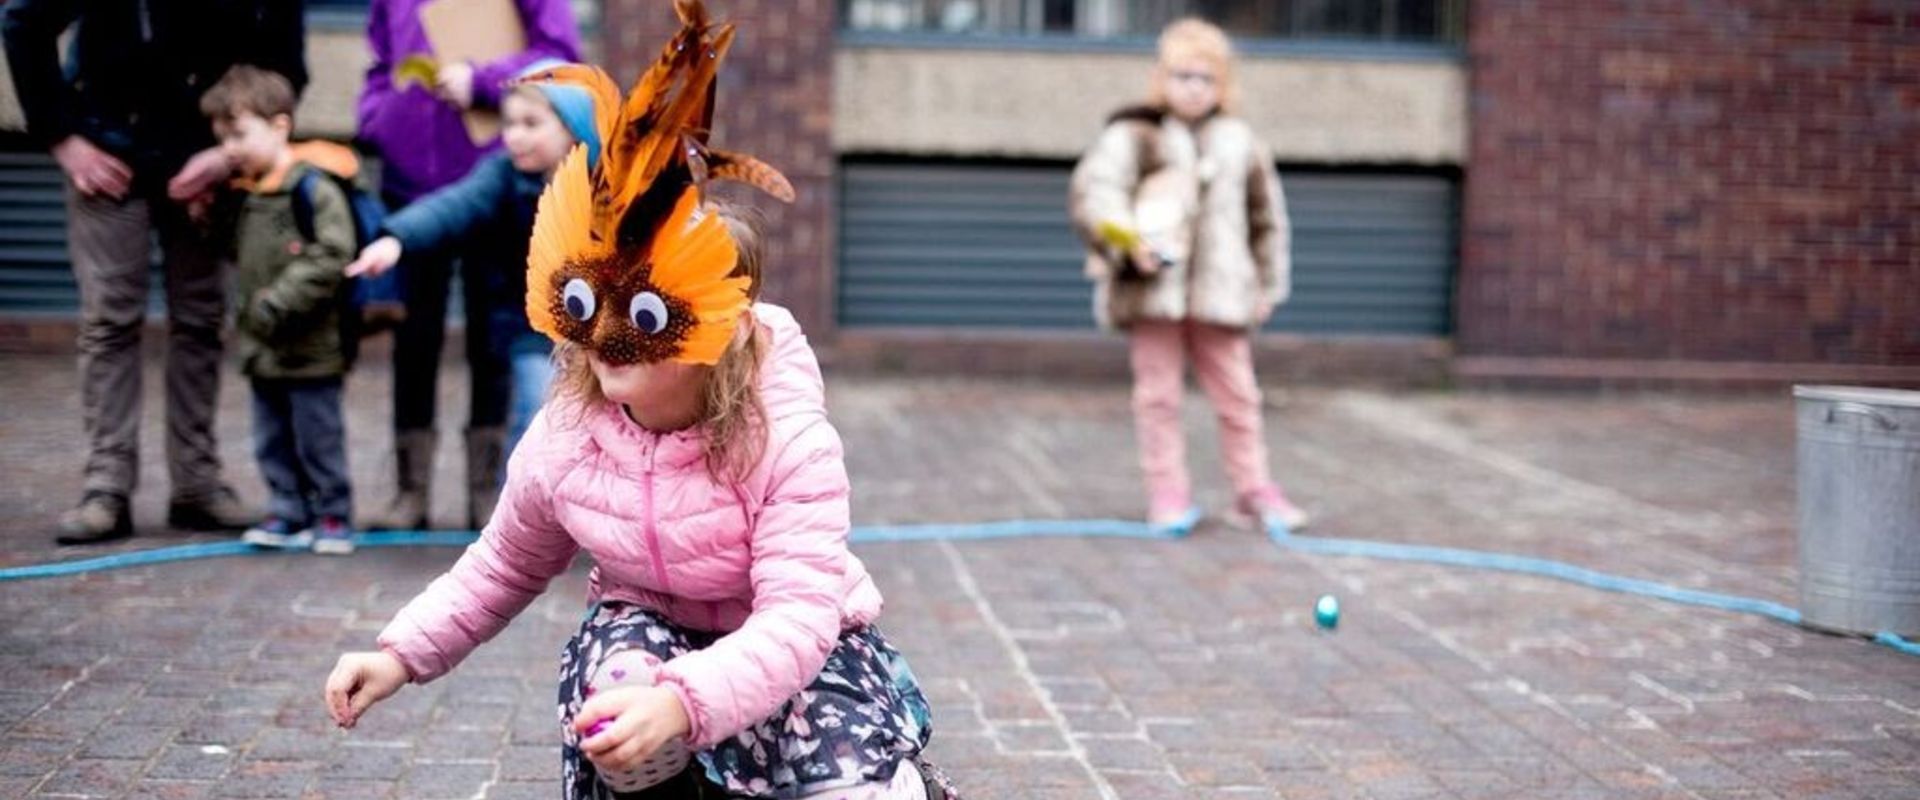 An audience member, wearing a feathered mask with big eyes, searches for something on the ground.